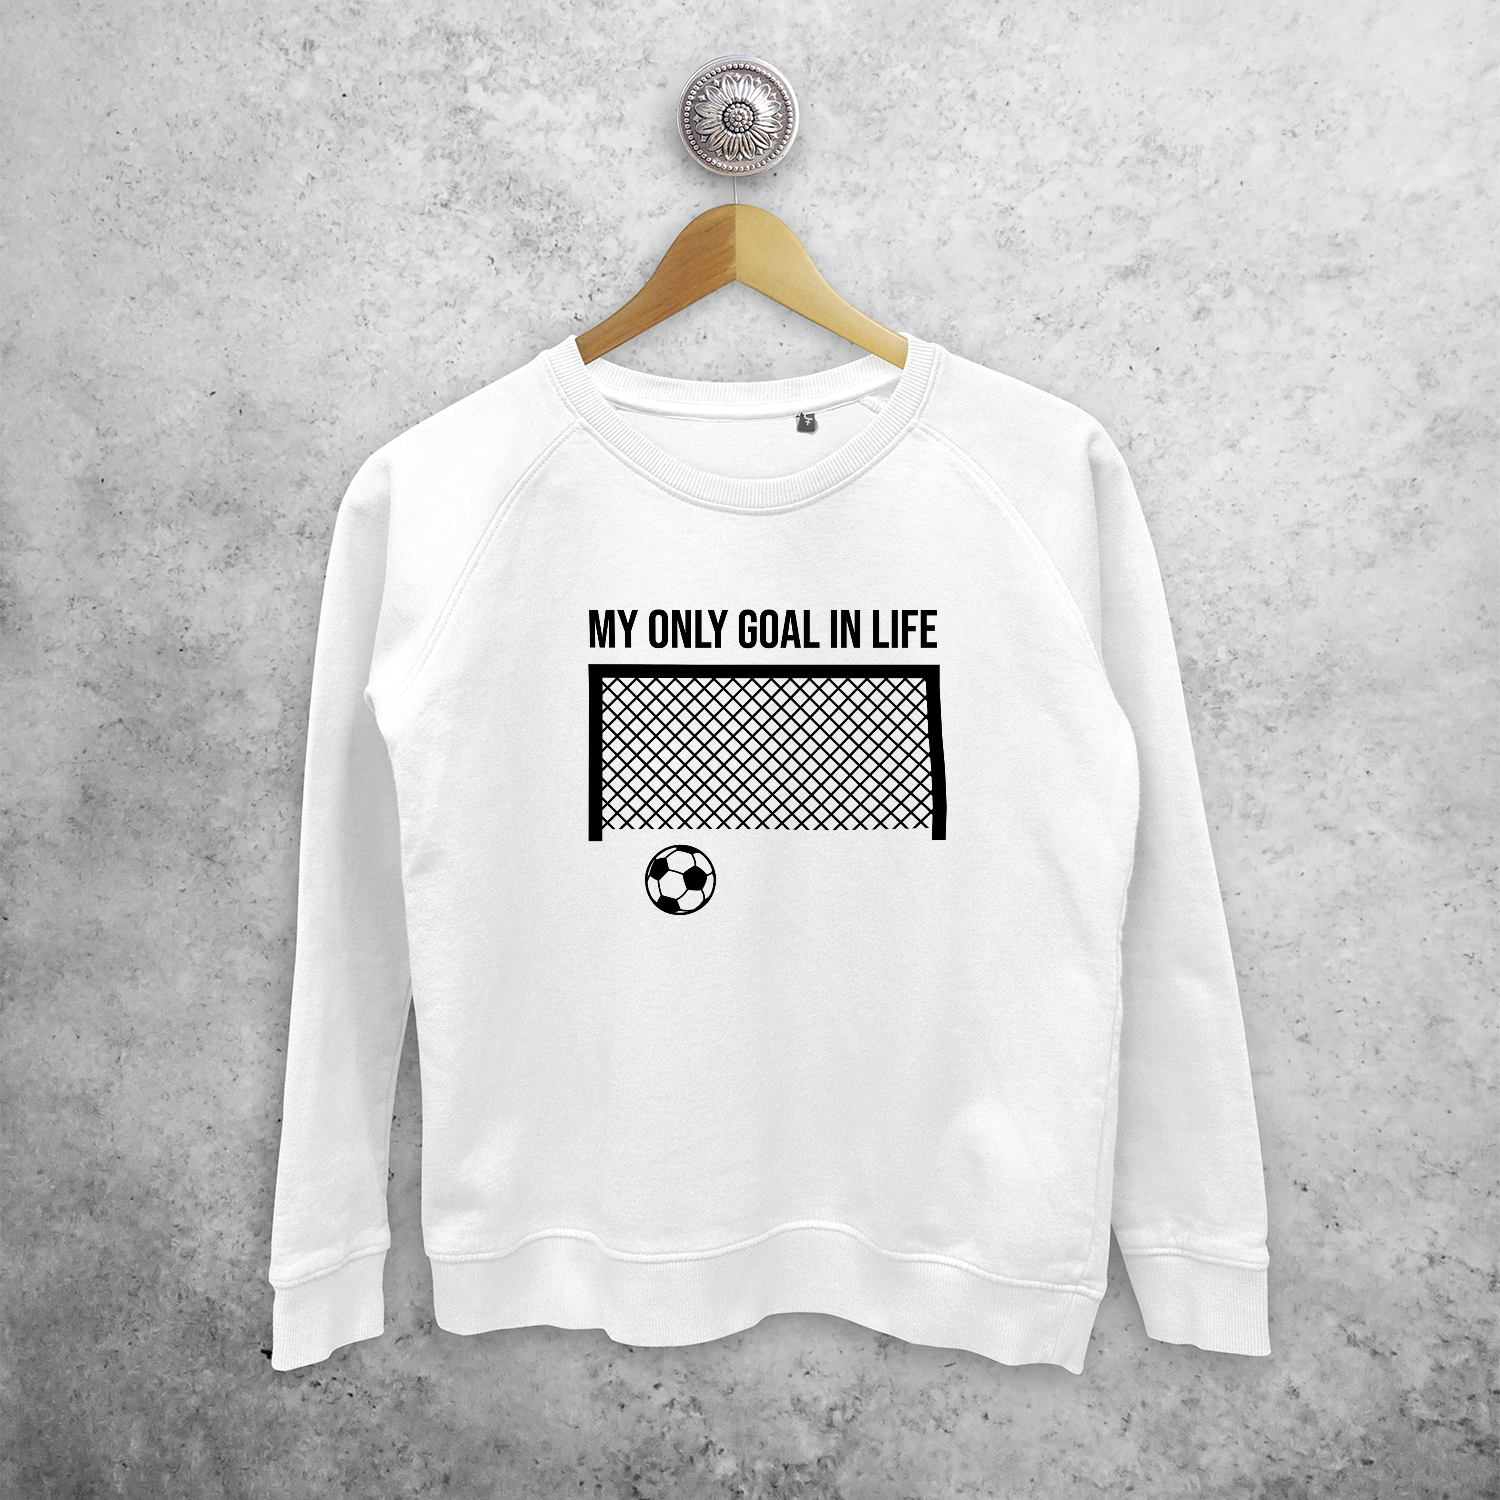 'My only goal in life' sweater